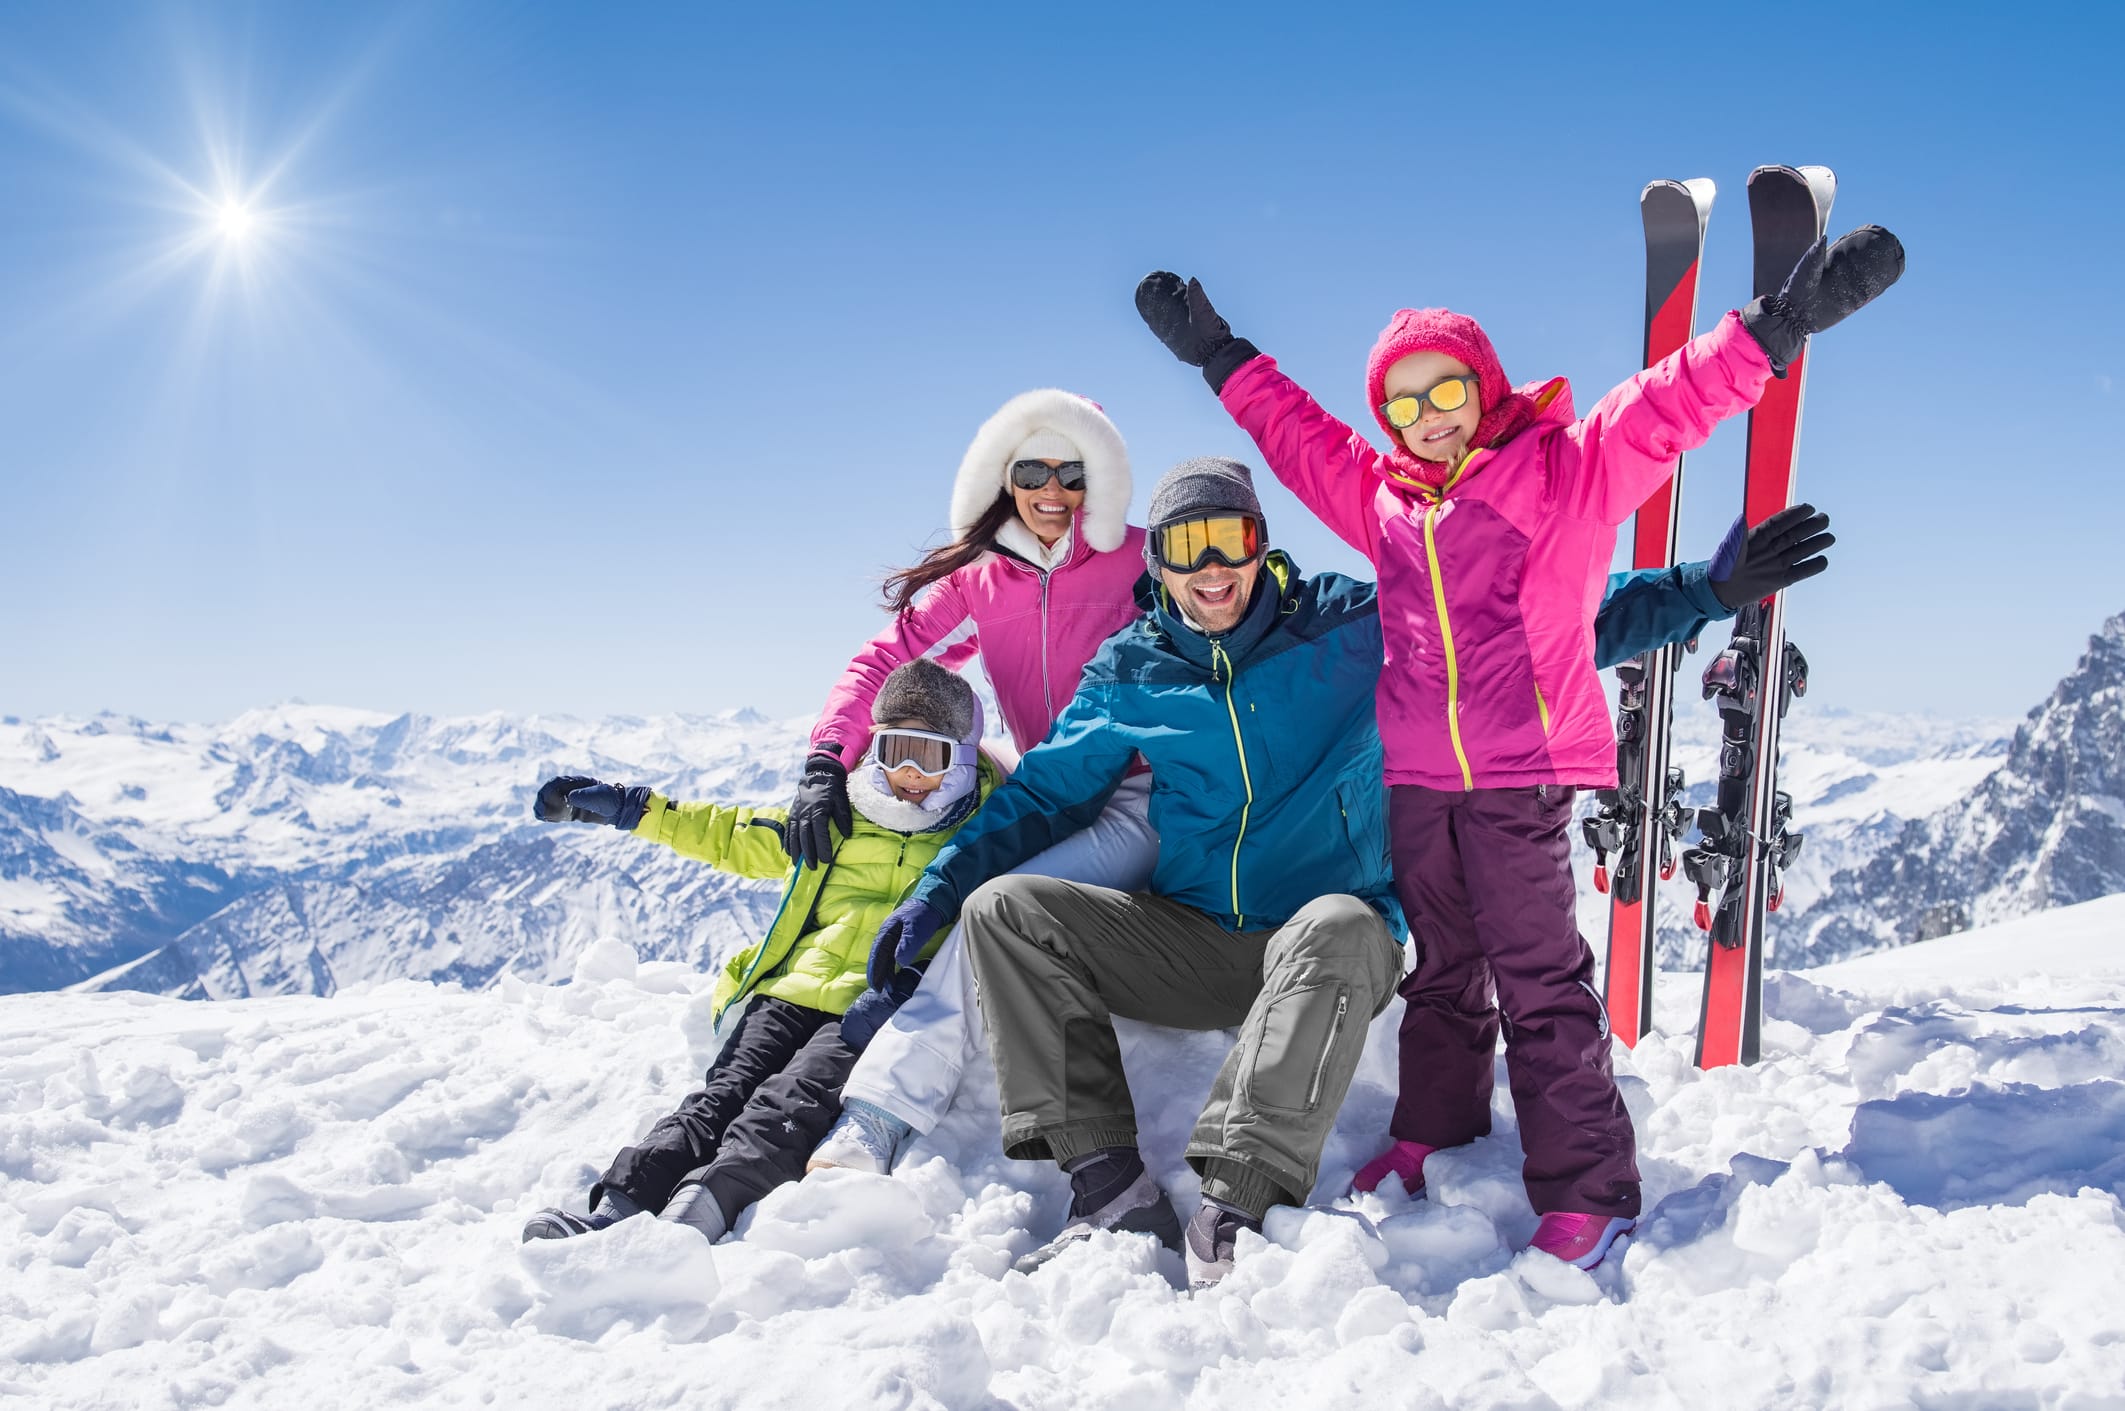 Family snow trip: Laughing family in winter vacation with ski sport on snowy mountains. Happy man and woman with sons having fun and looking at camera. Family with two children enjoying winter holiday at ski resort.